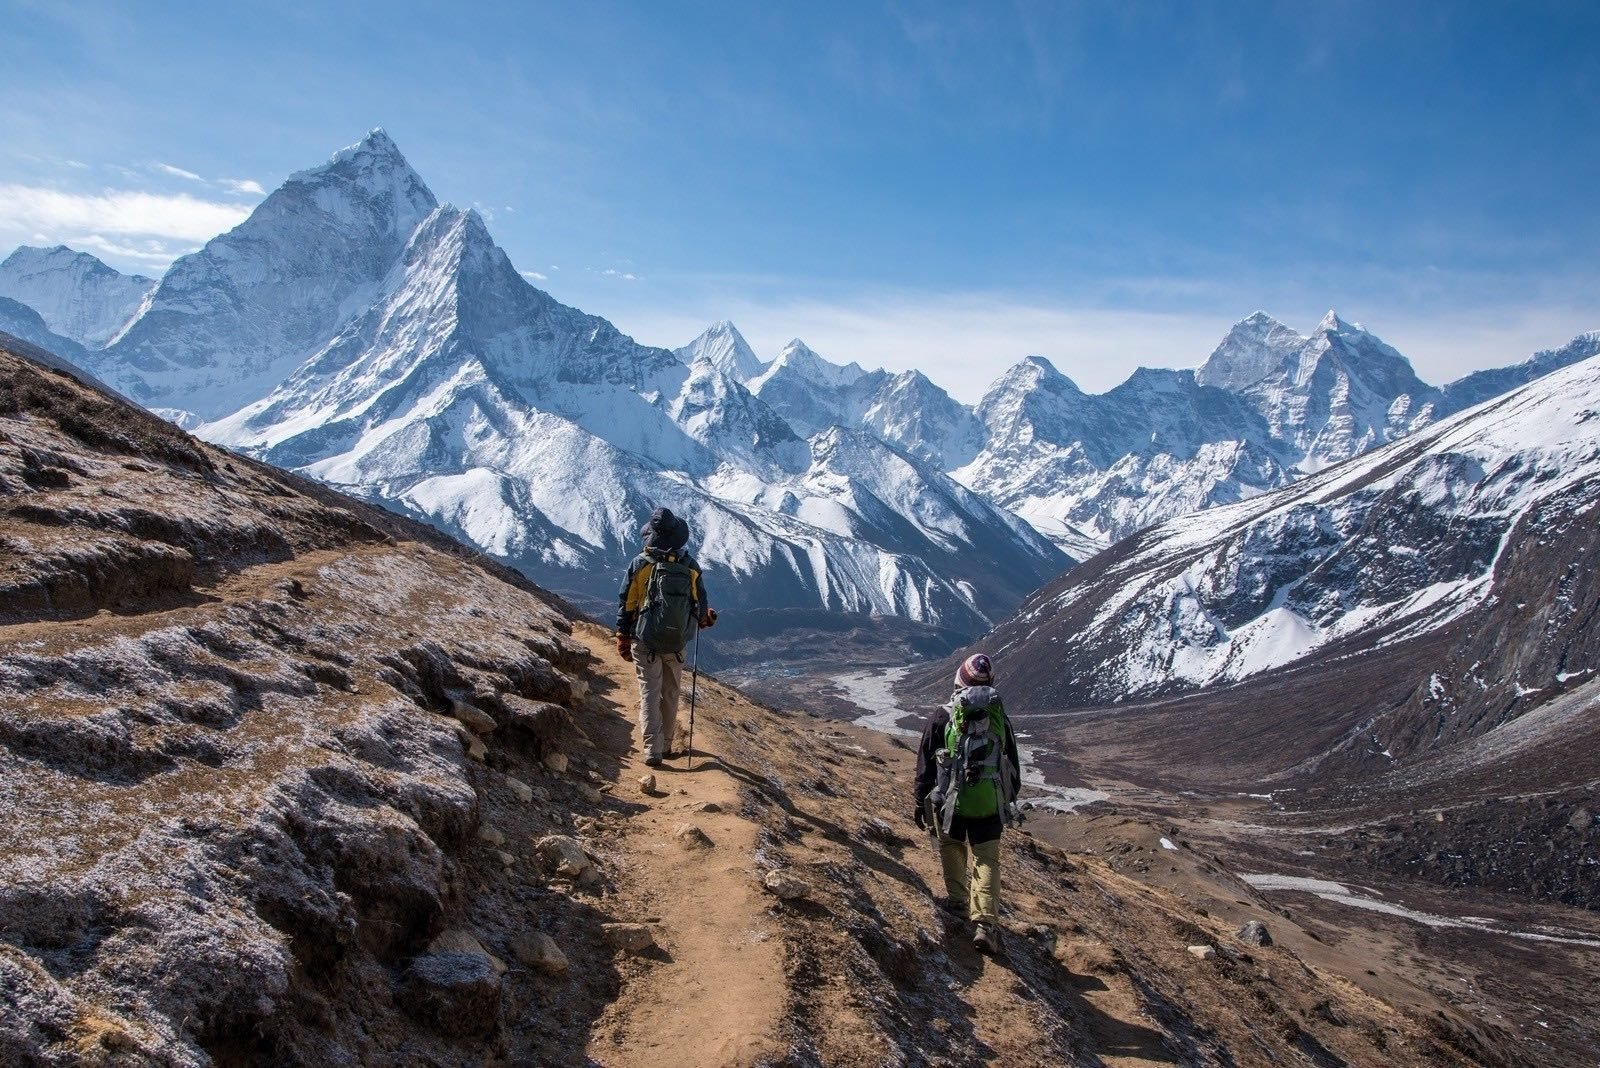 Two hikers trekking through the mighty mountains of the Himalayas, with a stunning mountainous backdrop.